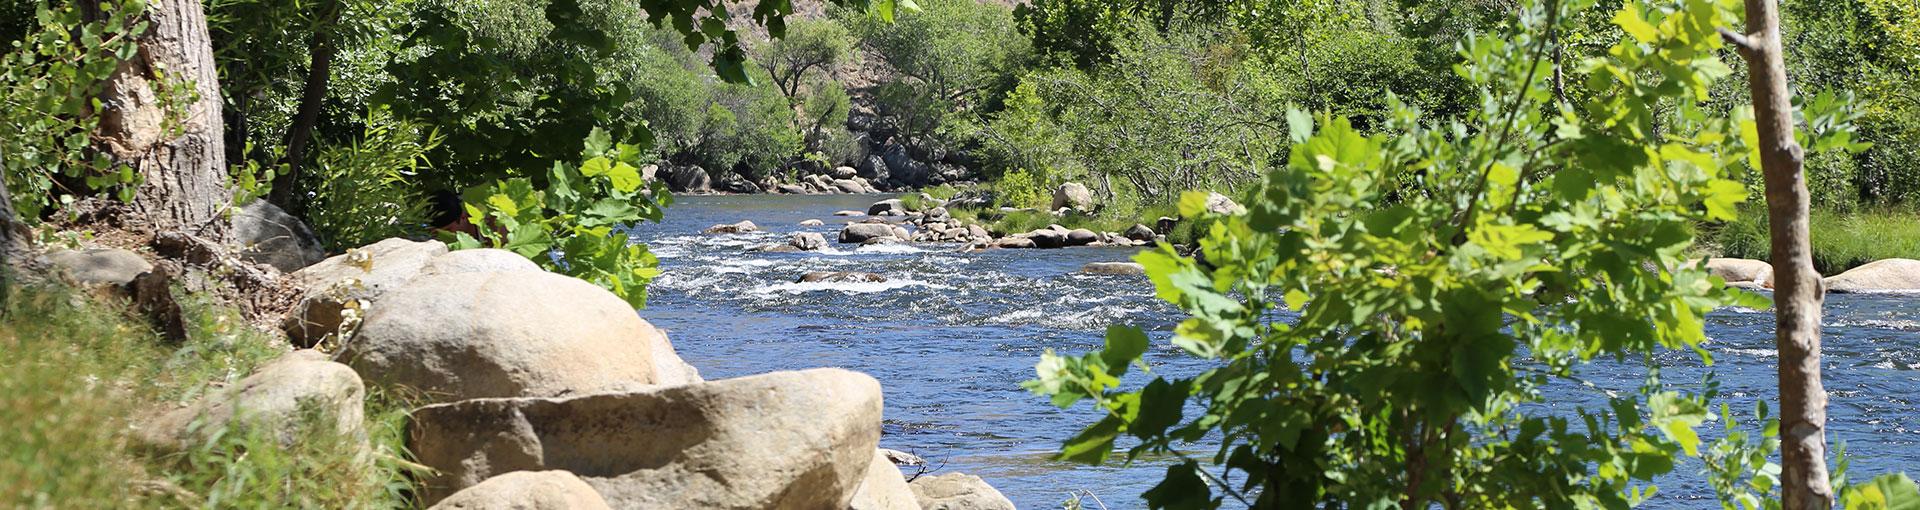 Kern River - Photo By Board of Trade